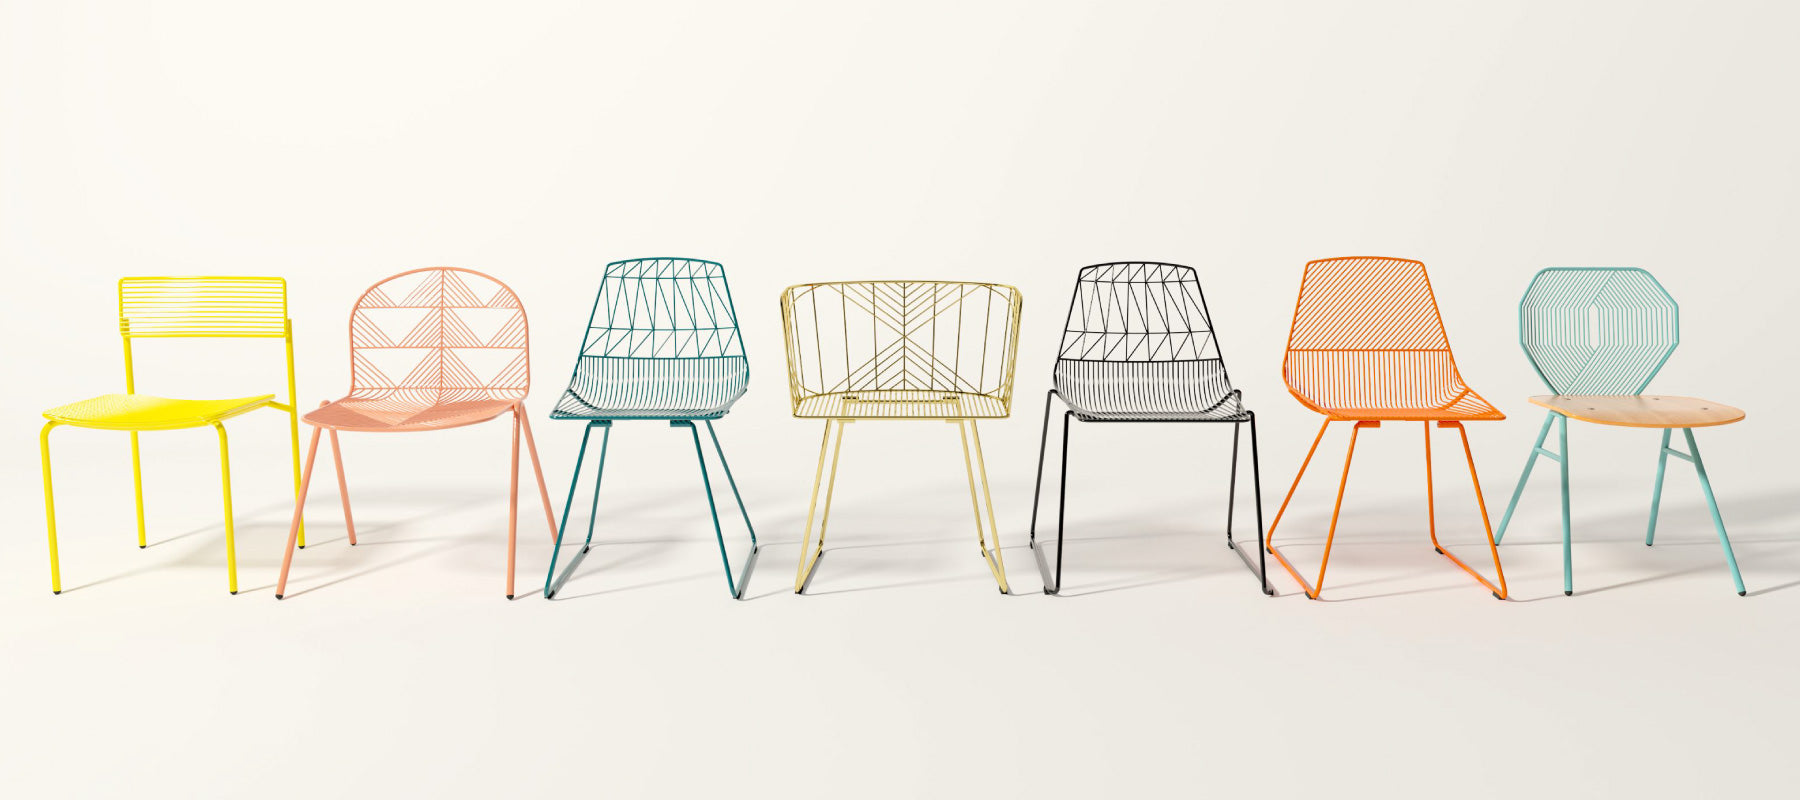 Contemporary Chair Designs, Featuring Bend Goods Signature Wire Patterns